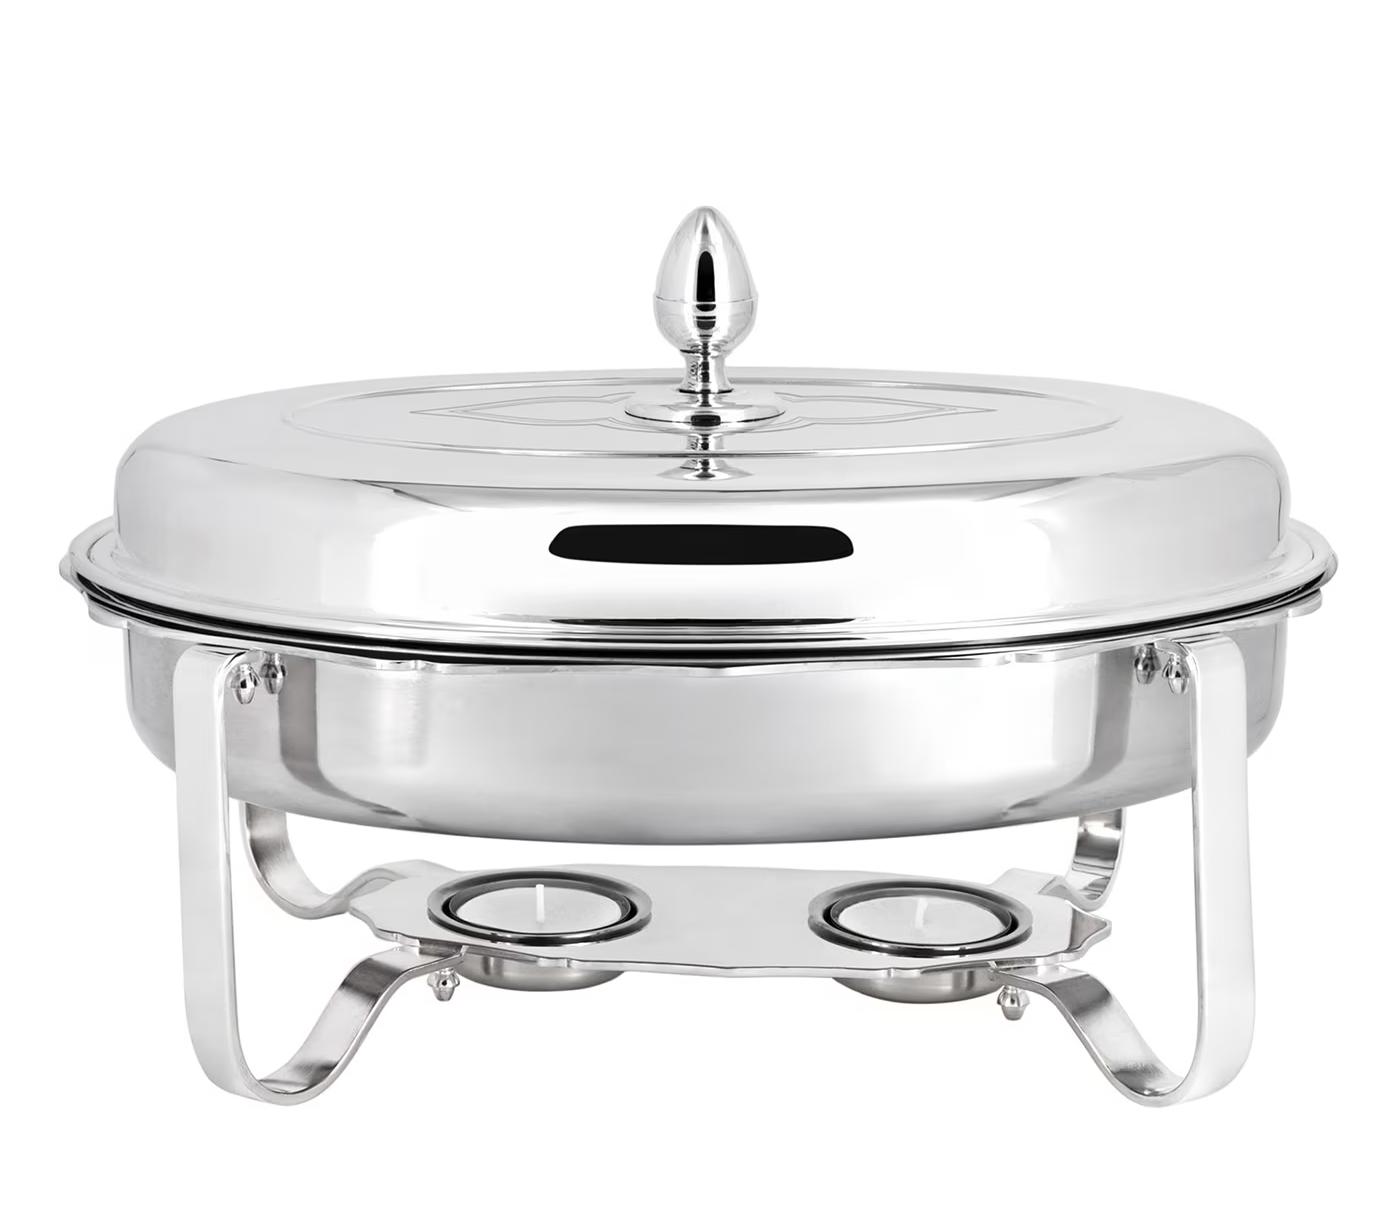 Oval Silver Chafing Dish